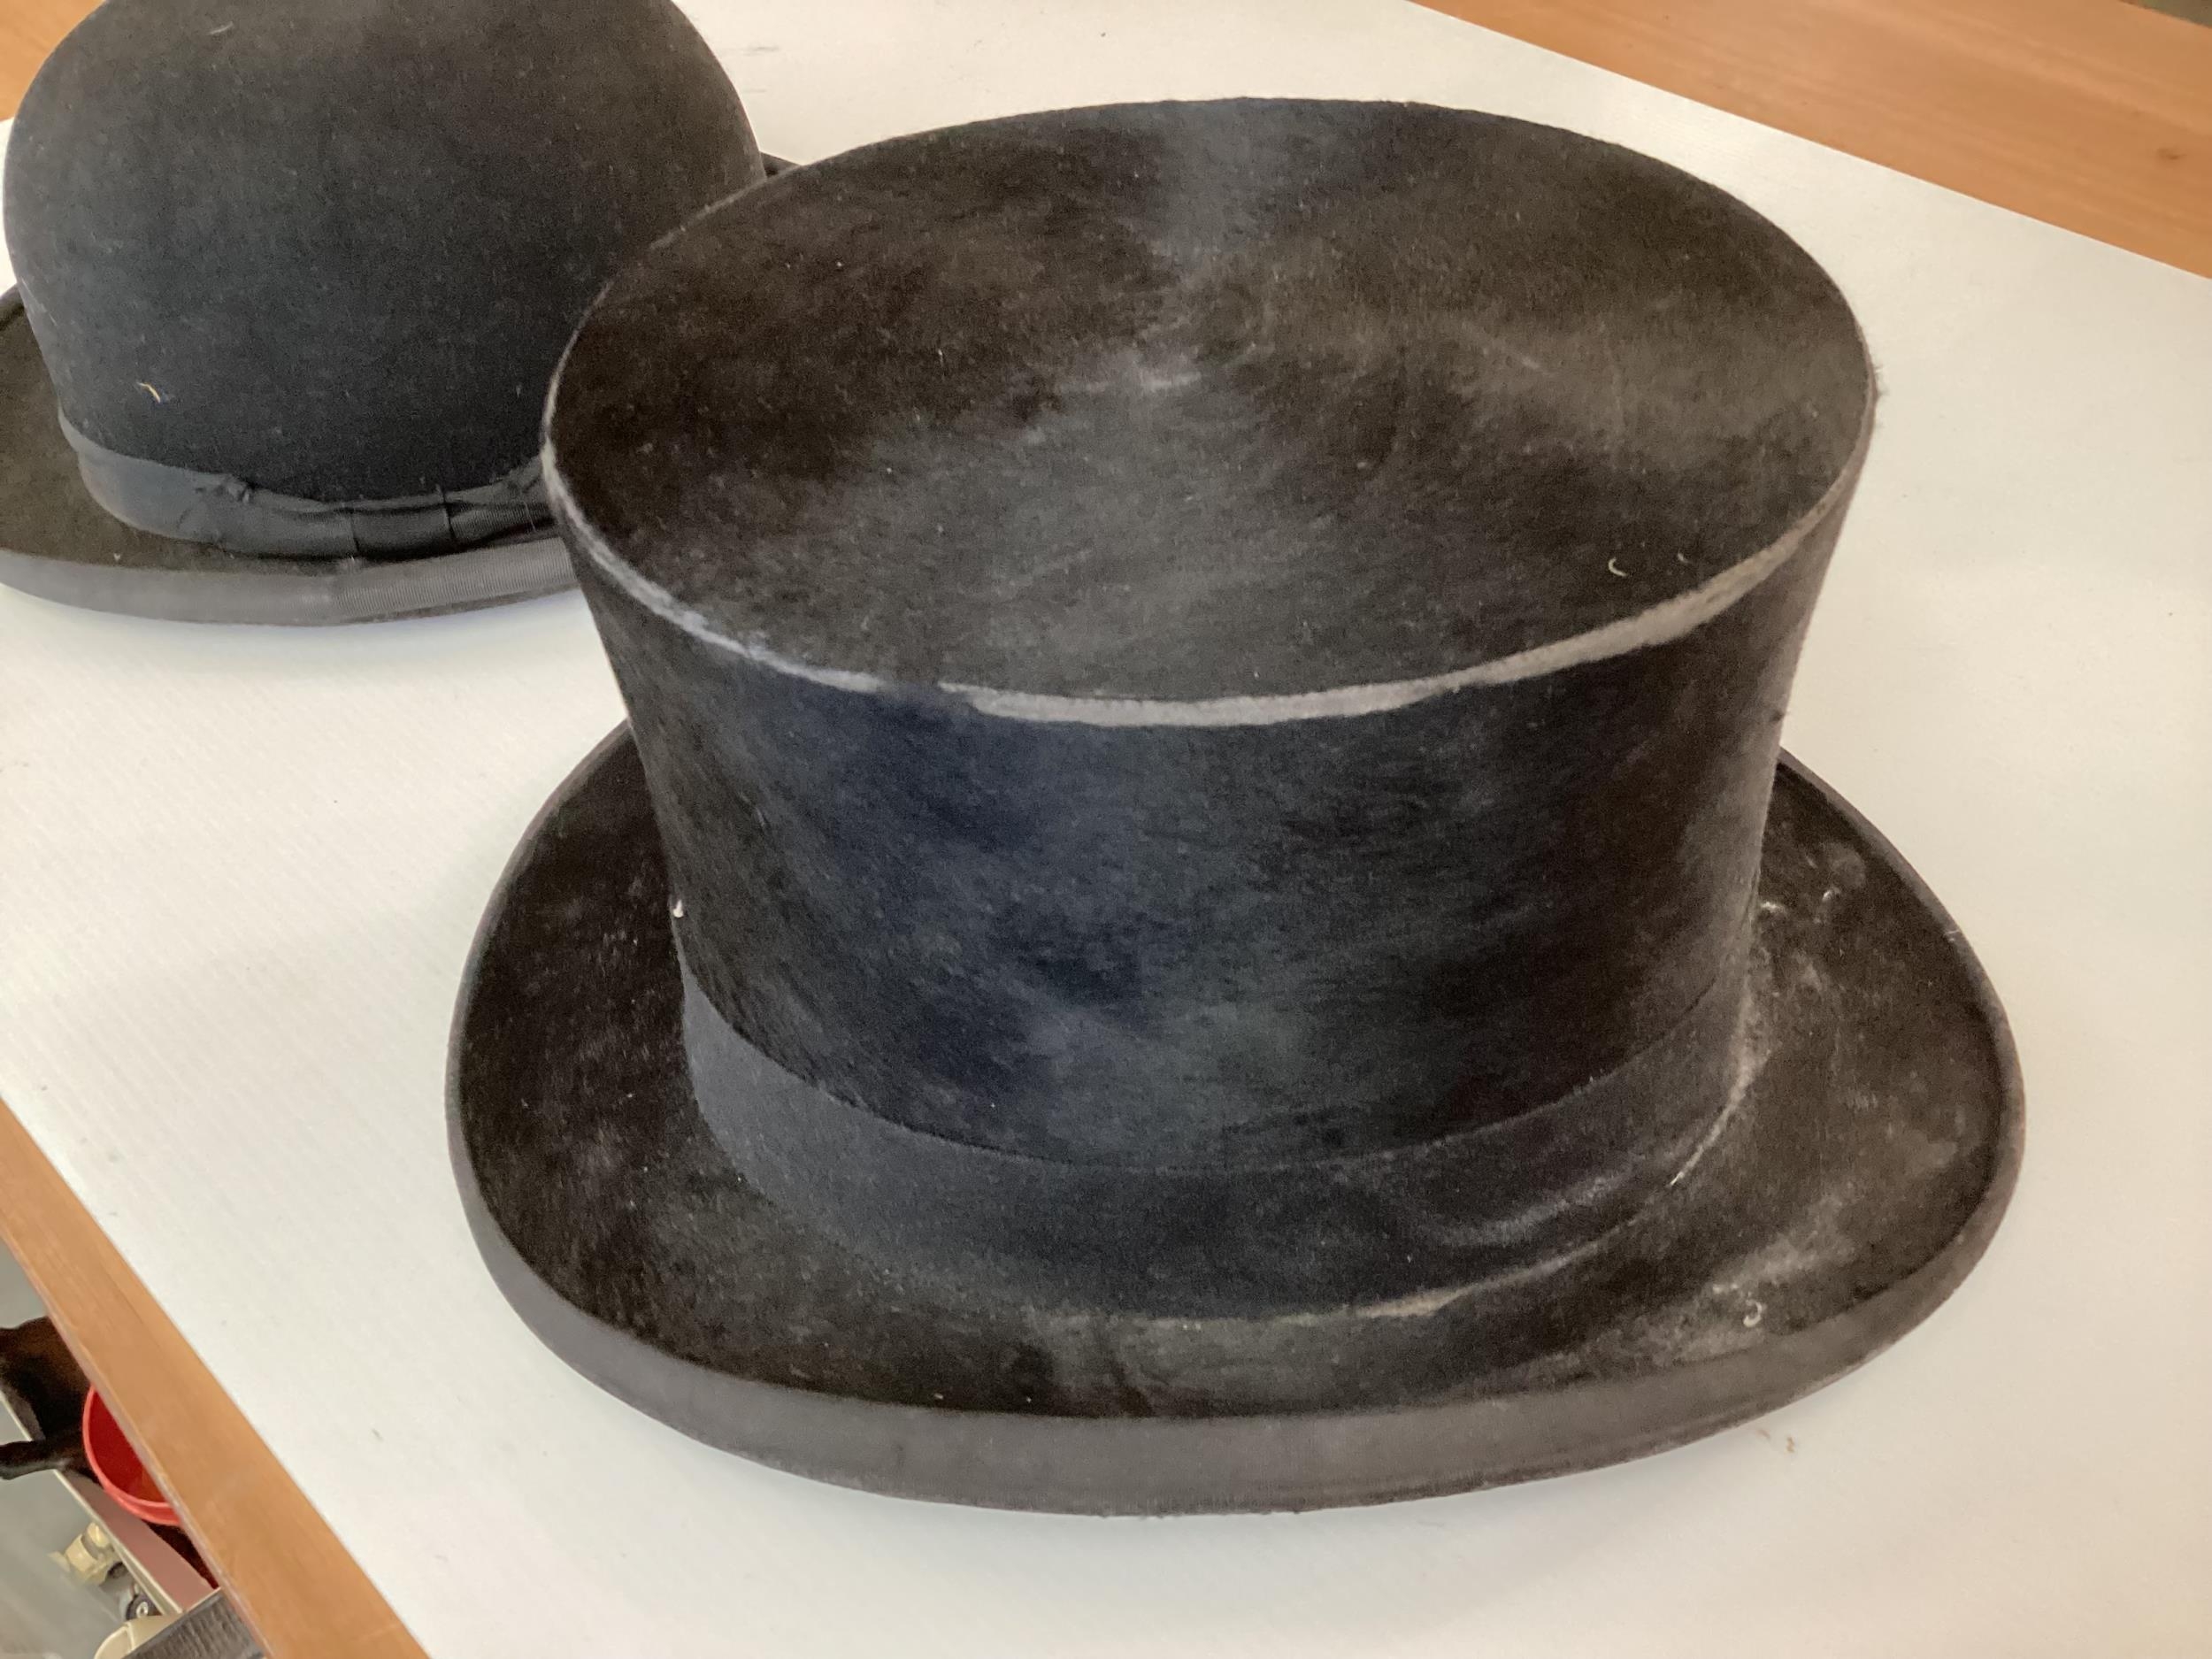 A Top hat, Gieves Ltd, 21 Old Bond Street and a bowler hat Simpsons of Picadilly, some wear to both - Image 2 of 5